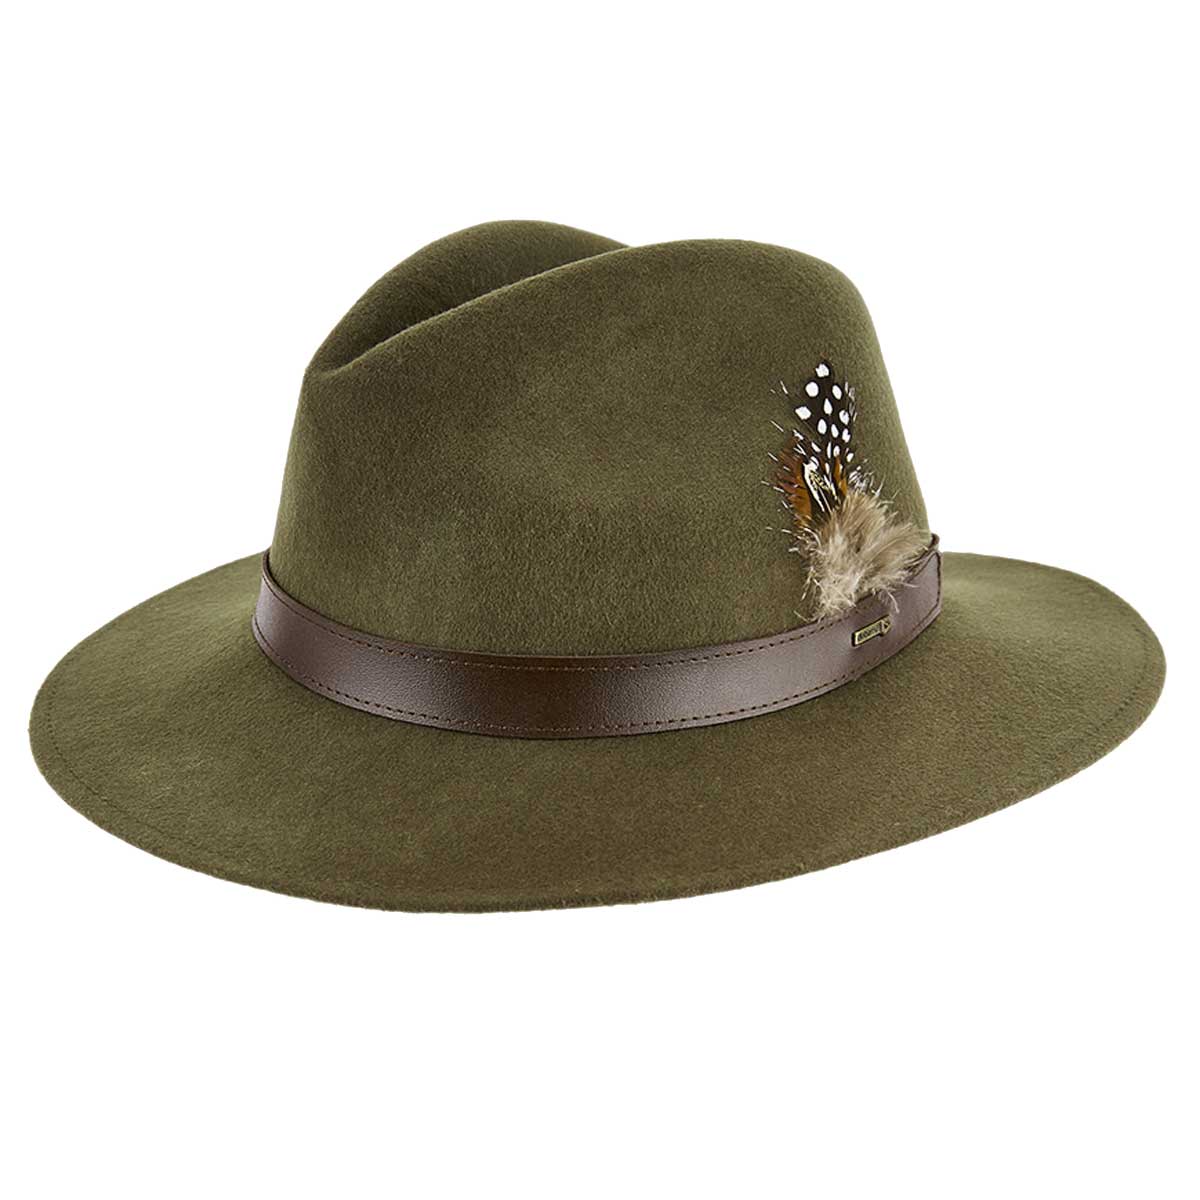 DUBARRY Gallagher Feather Trimmed Felt Fedora Hat - Olive